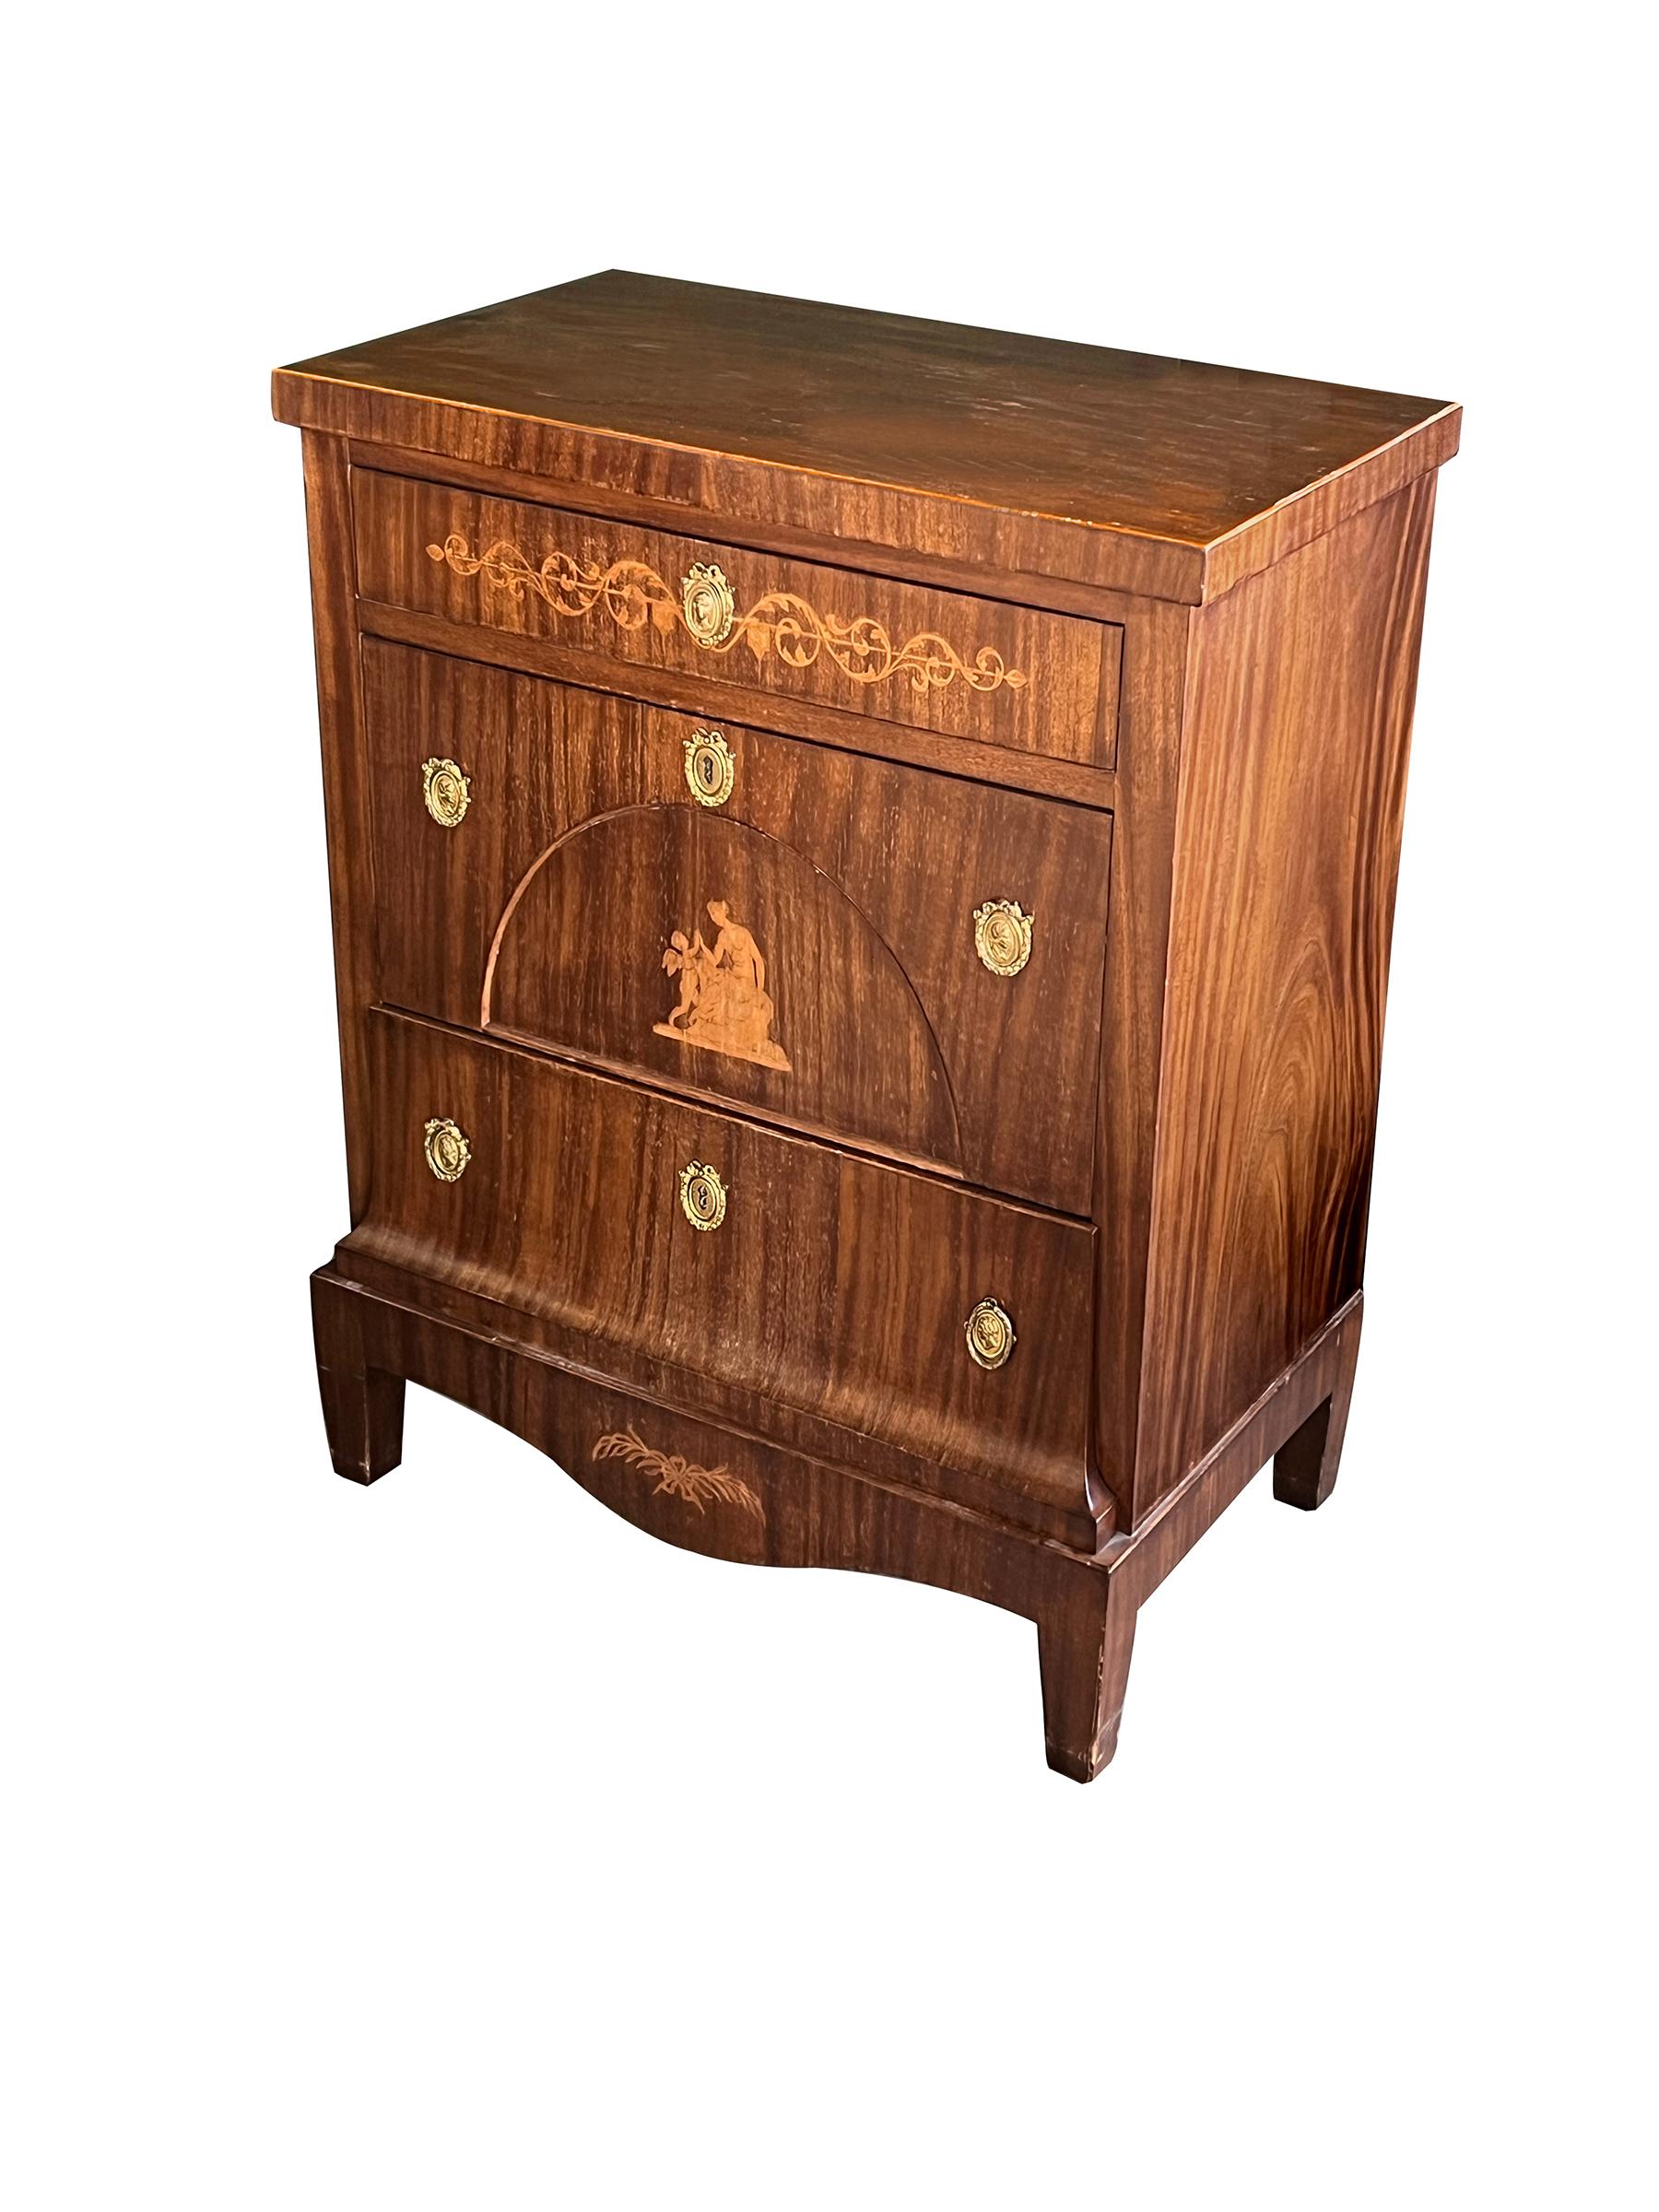 the handsome chest constructed during the Golden Age of Danish furniture (1800-1850) and composed of well-figured mahogany veneer fitted with three drawers inlaid with neoclassical decoration all over a scalloped apron and raised on tapering